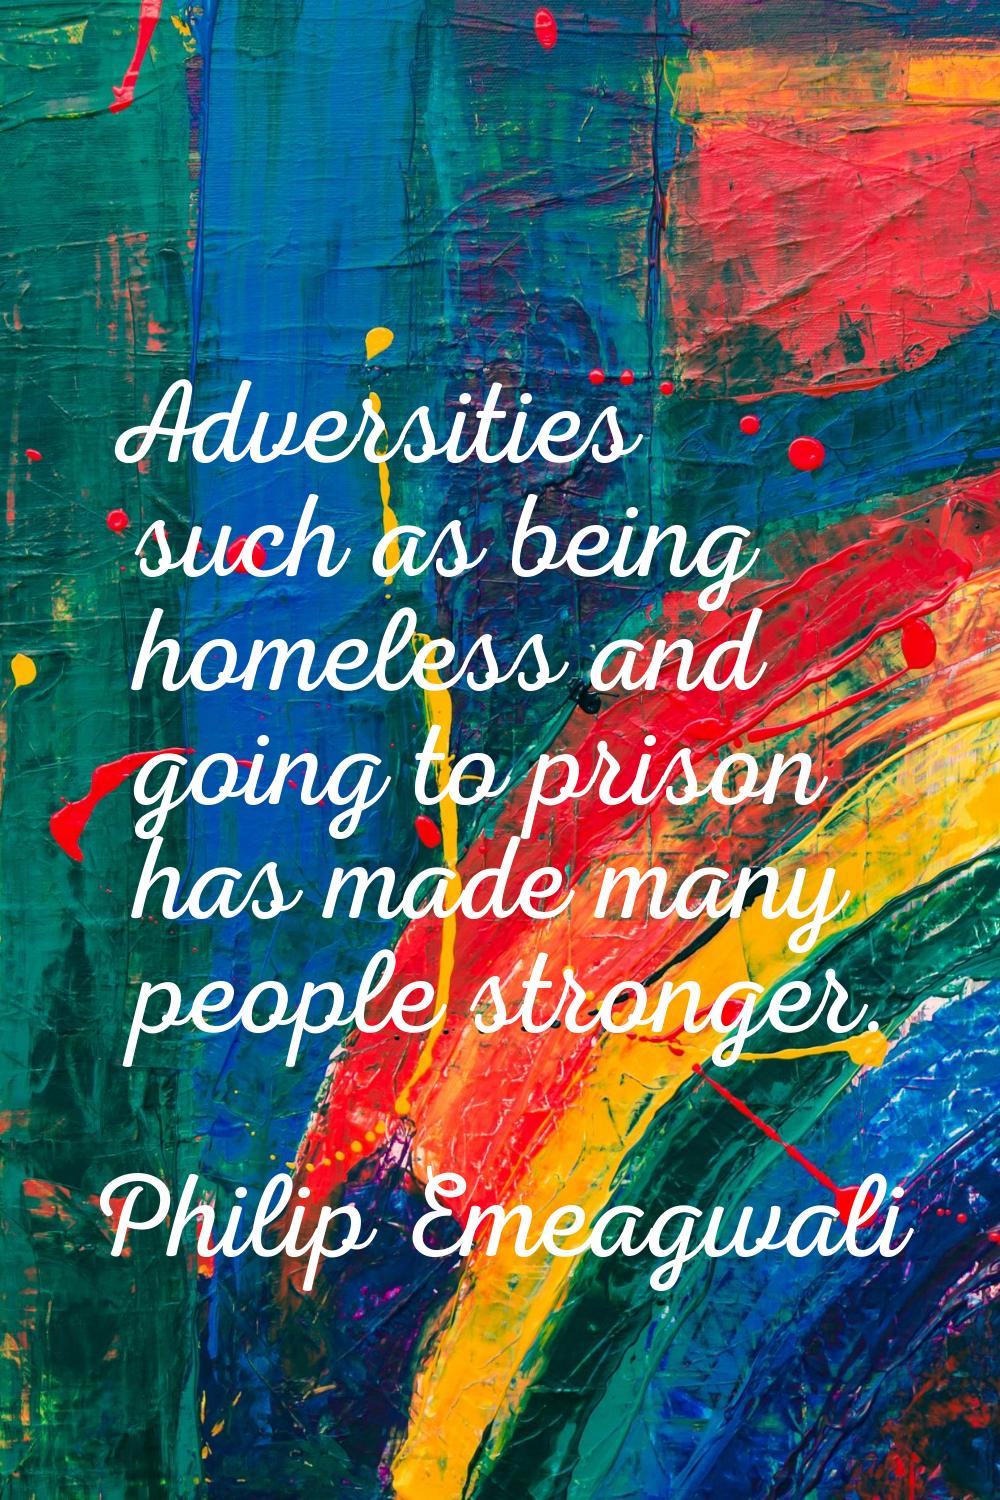 Adversities such as being homeless and going to prison has made many people stronger.